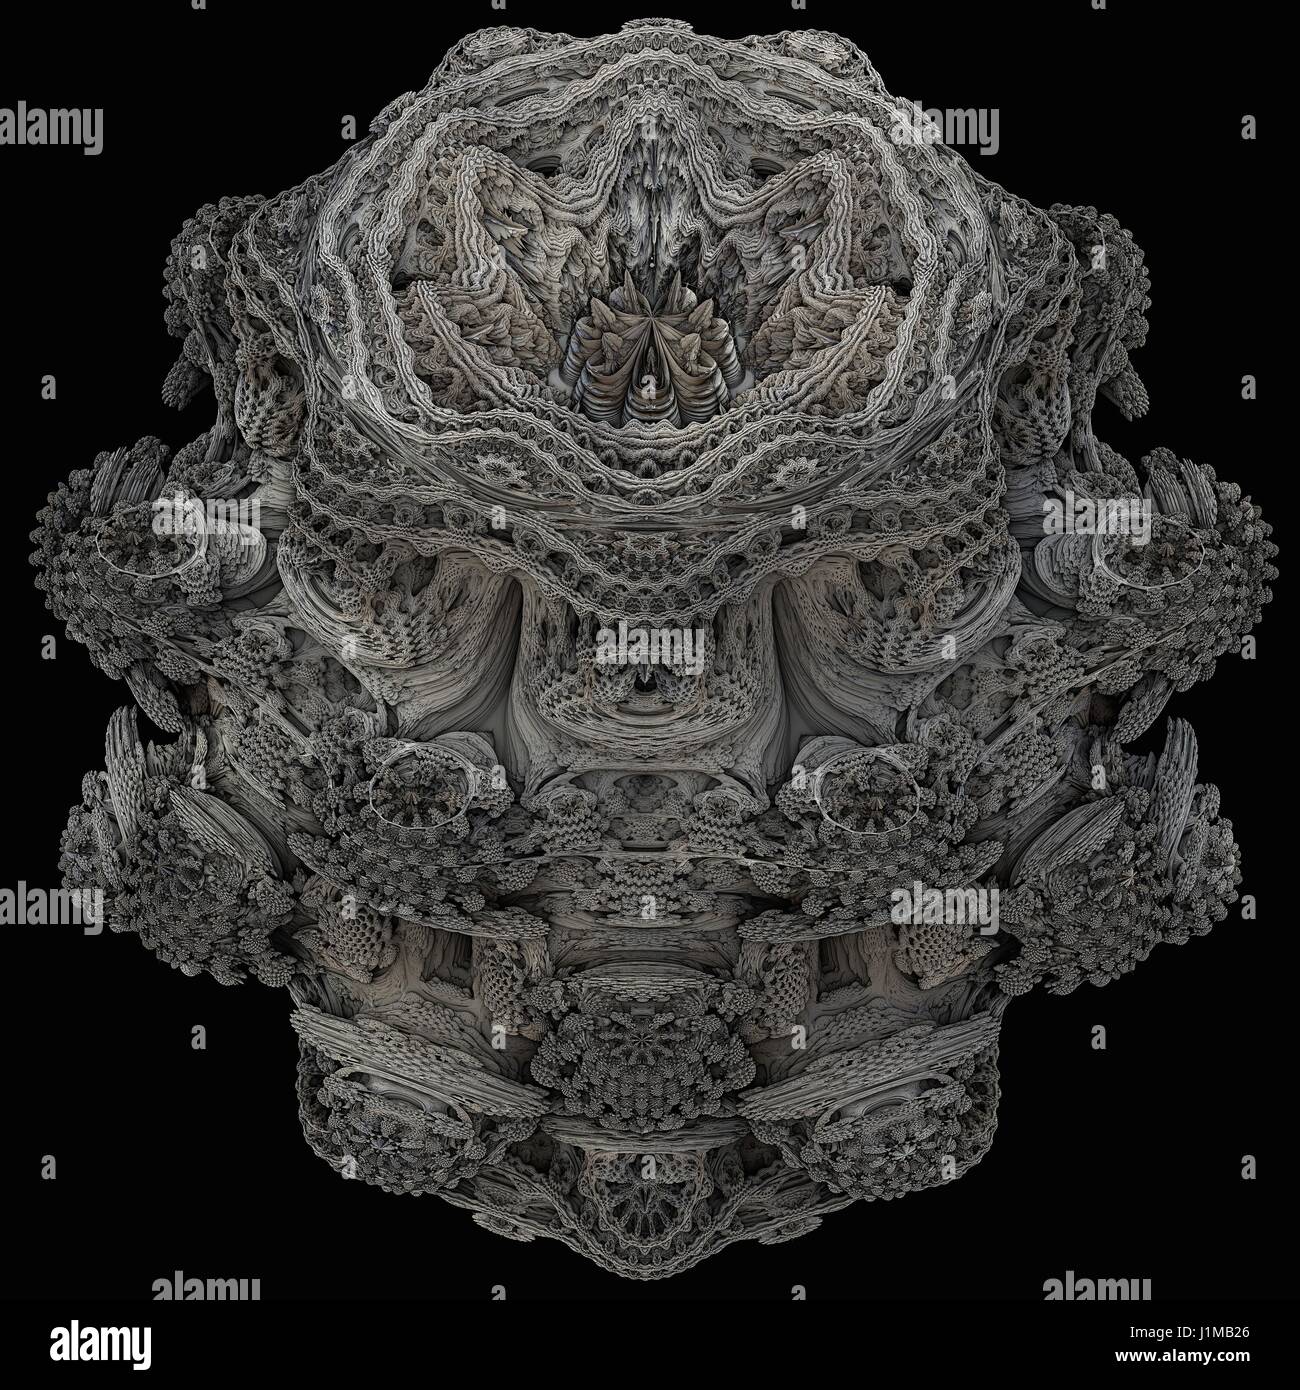 Mandelbulb fractal. Computer-generated image of a three-dimensional analogue derived form a Mandelbrot Set using spherical coordinates. Stock Photo